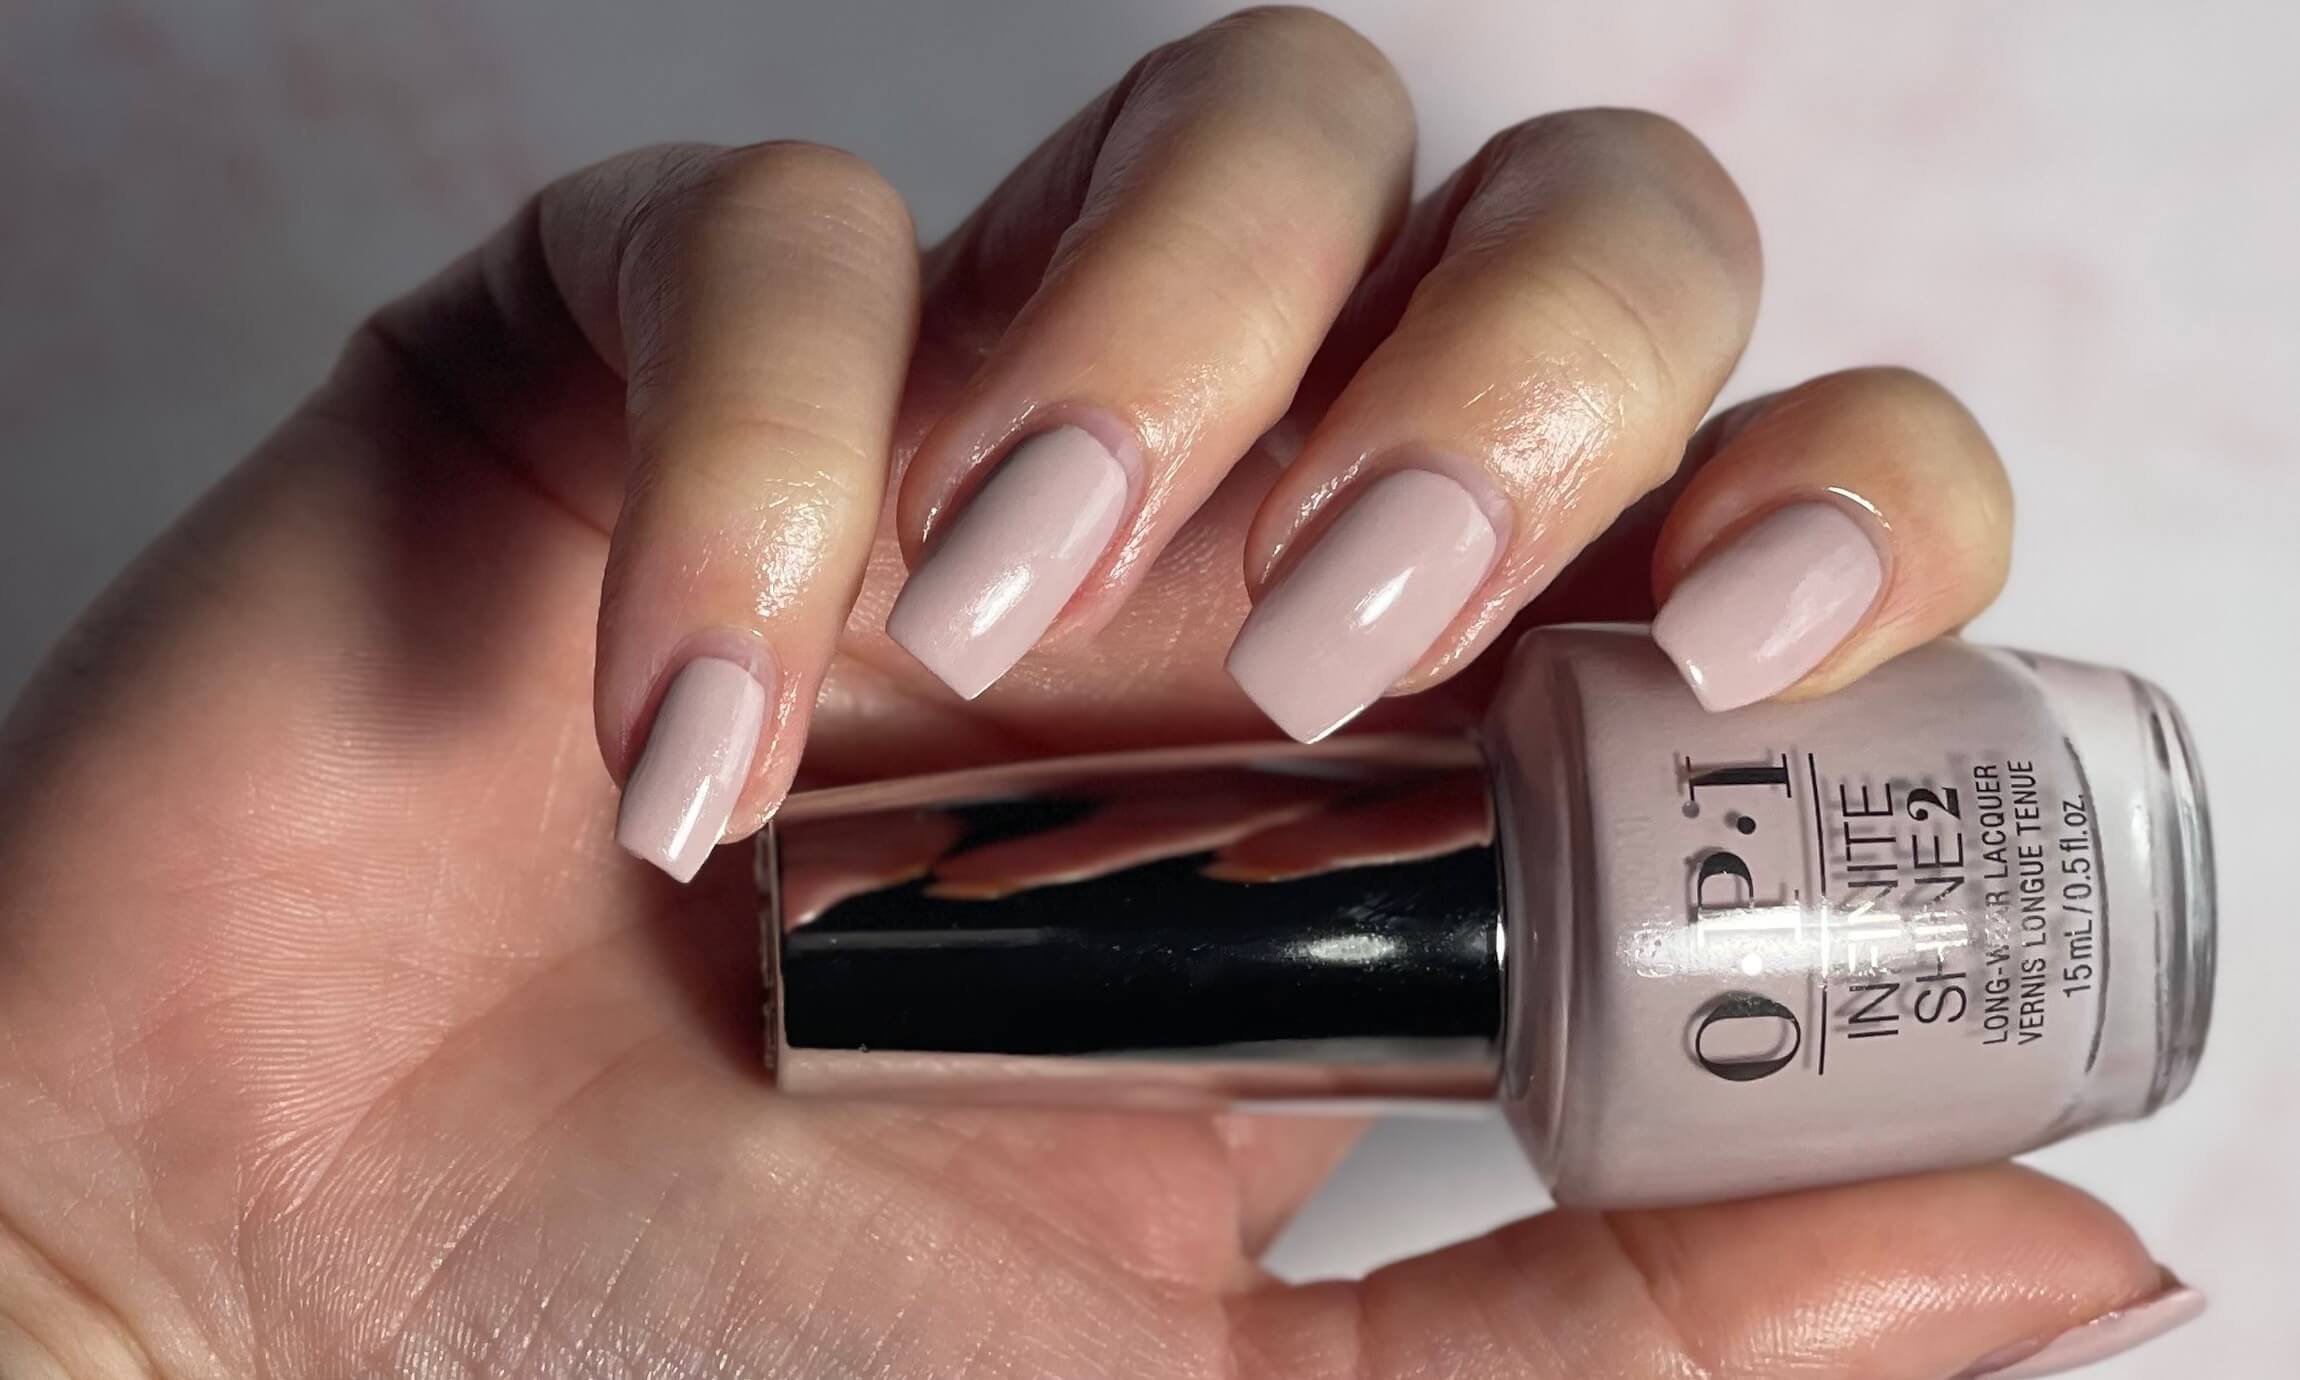 7. OPI GelColor in "Don't Bossa Nova Me Around" - wide 6